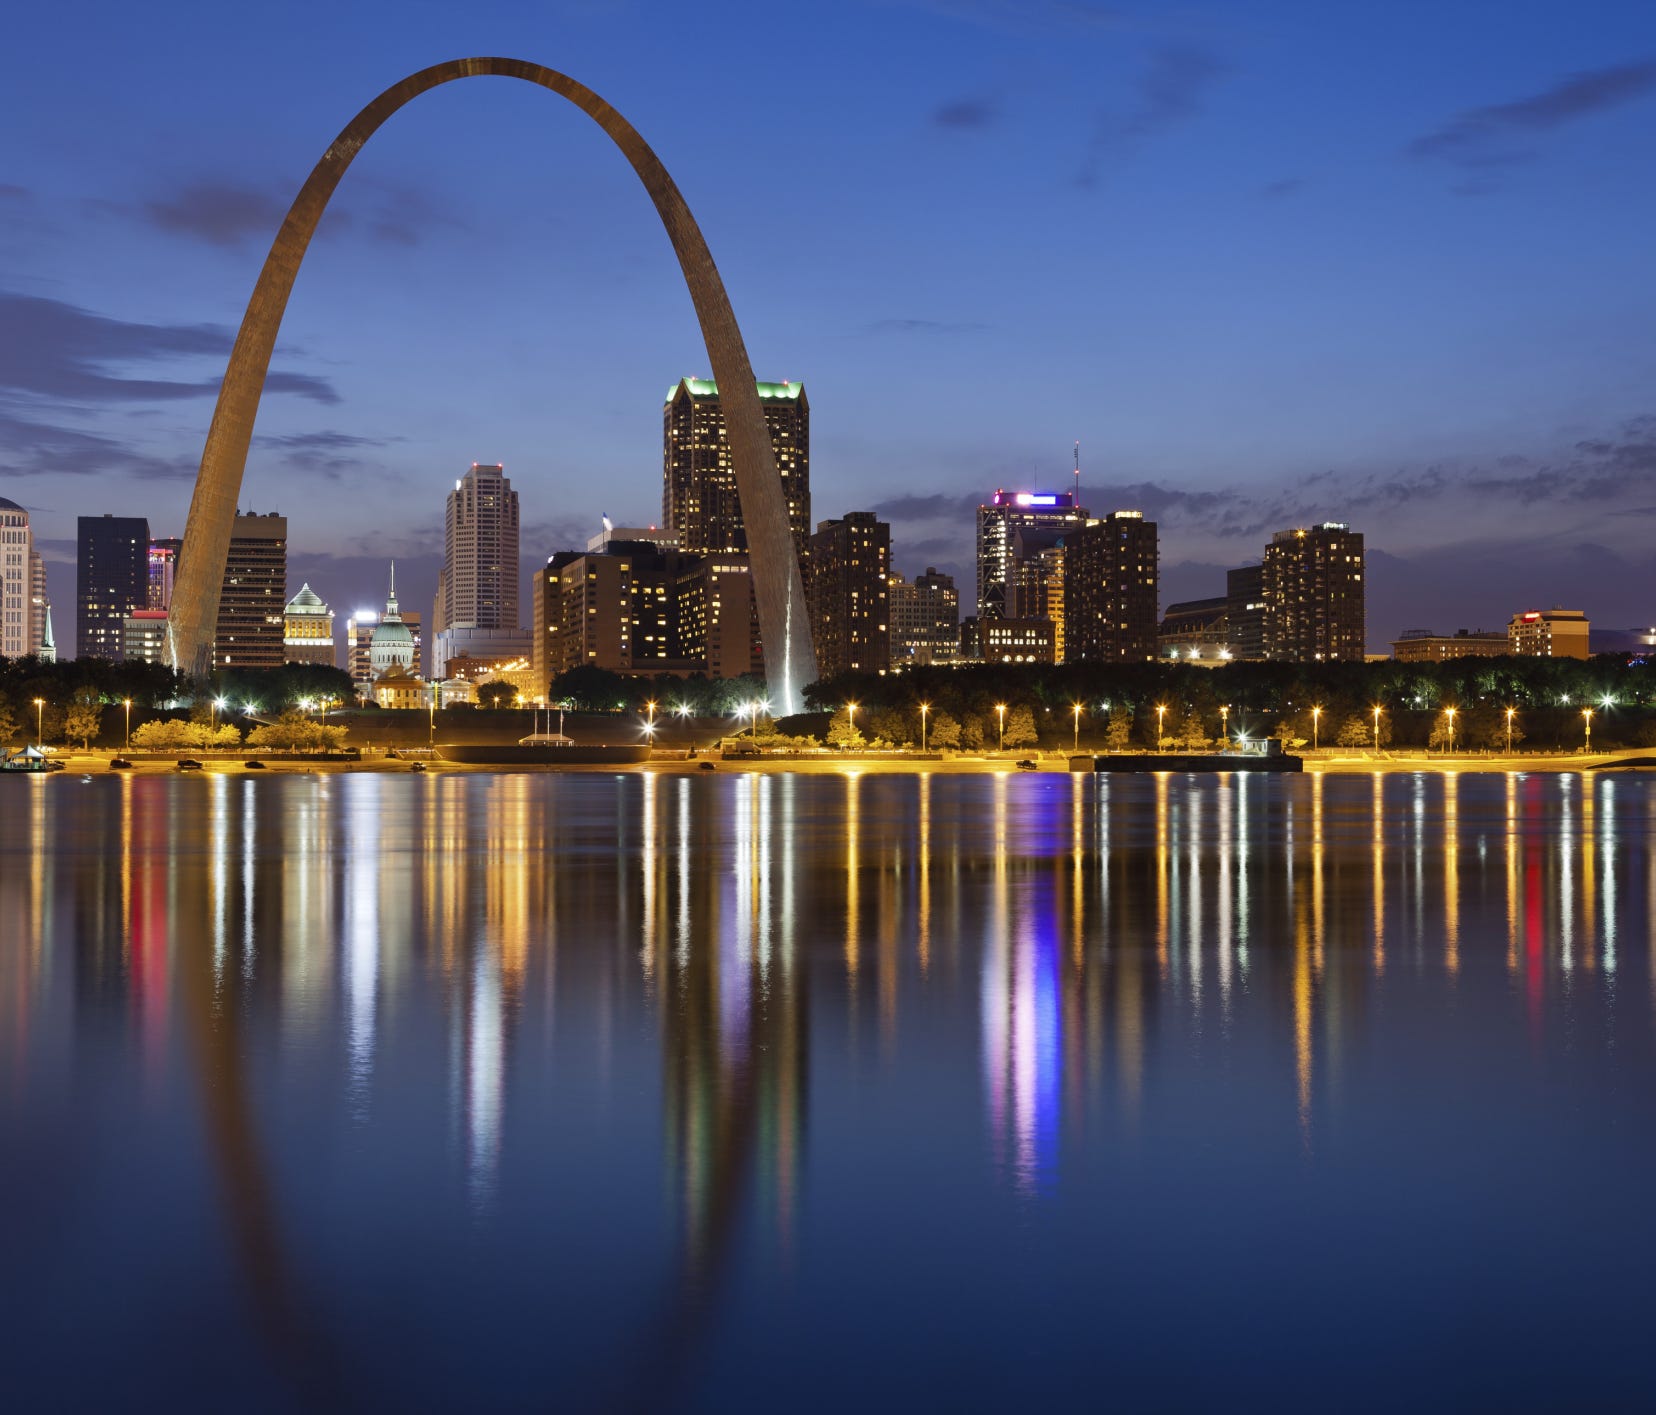 Missouri - The Gateway Arch, also known as the gateway to the west, is a great visual landmark and famously marks the St. Louis skyline since it was constructed in 1963.